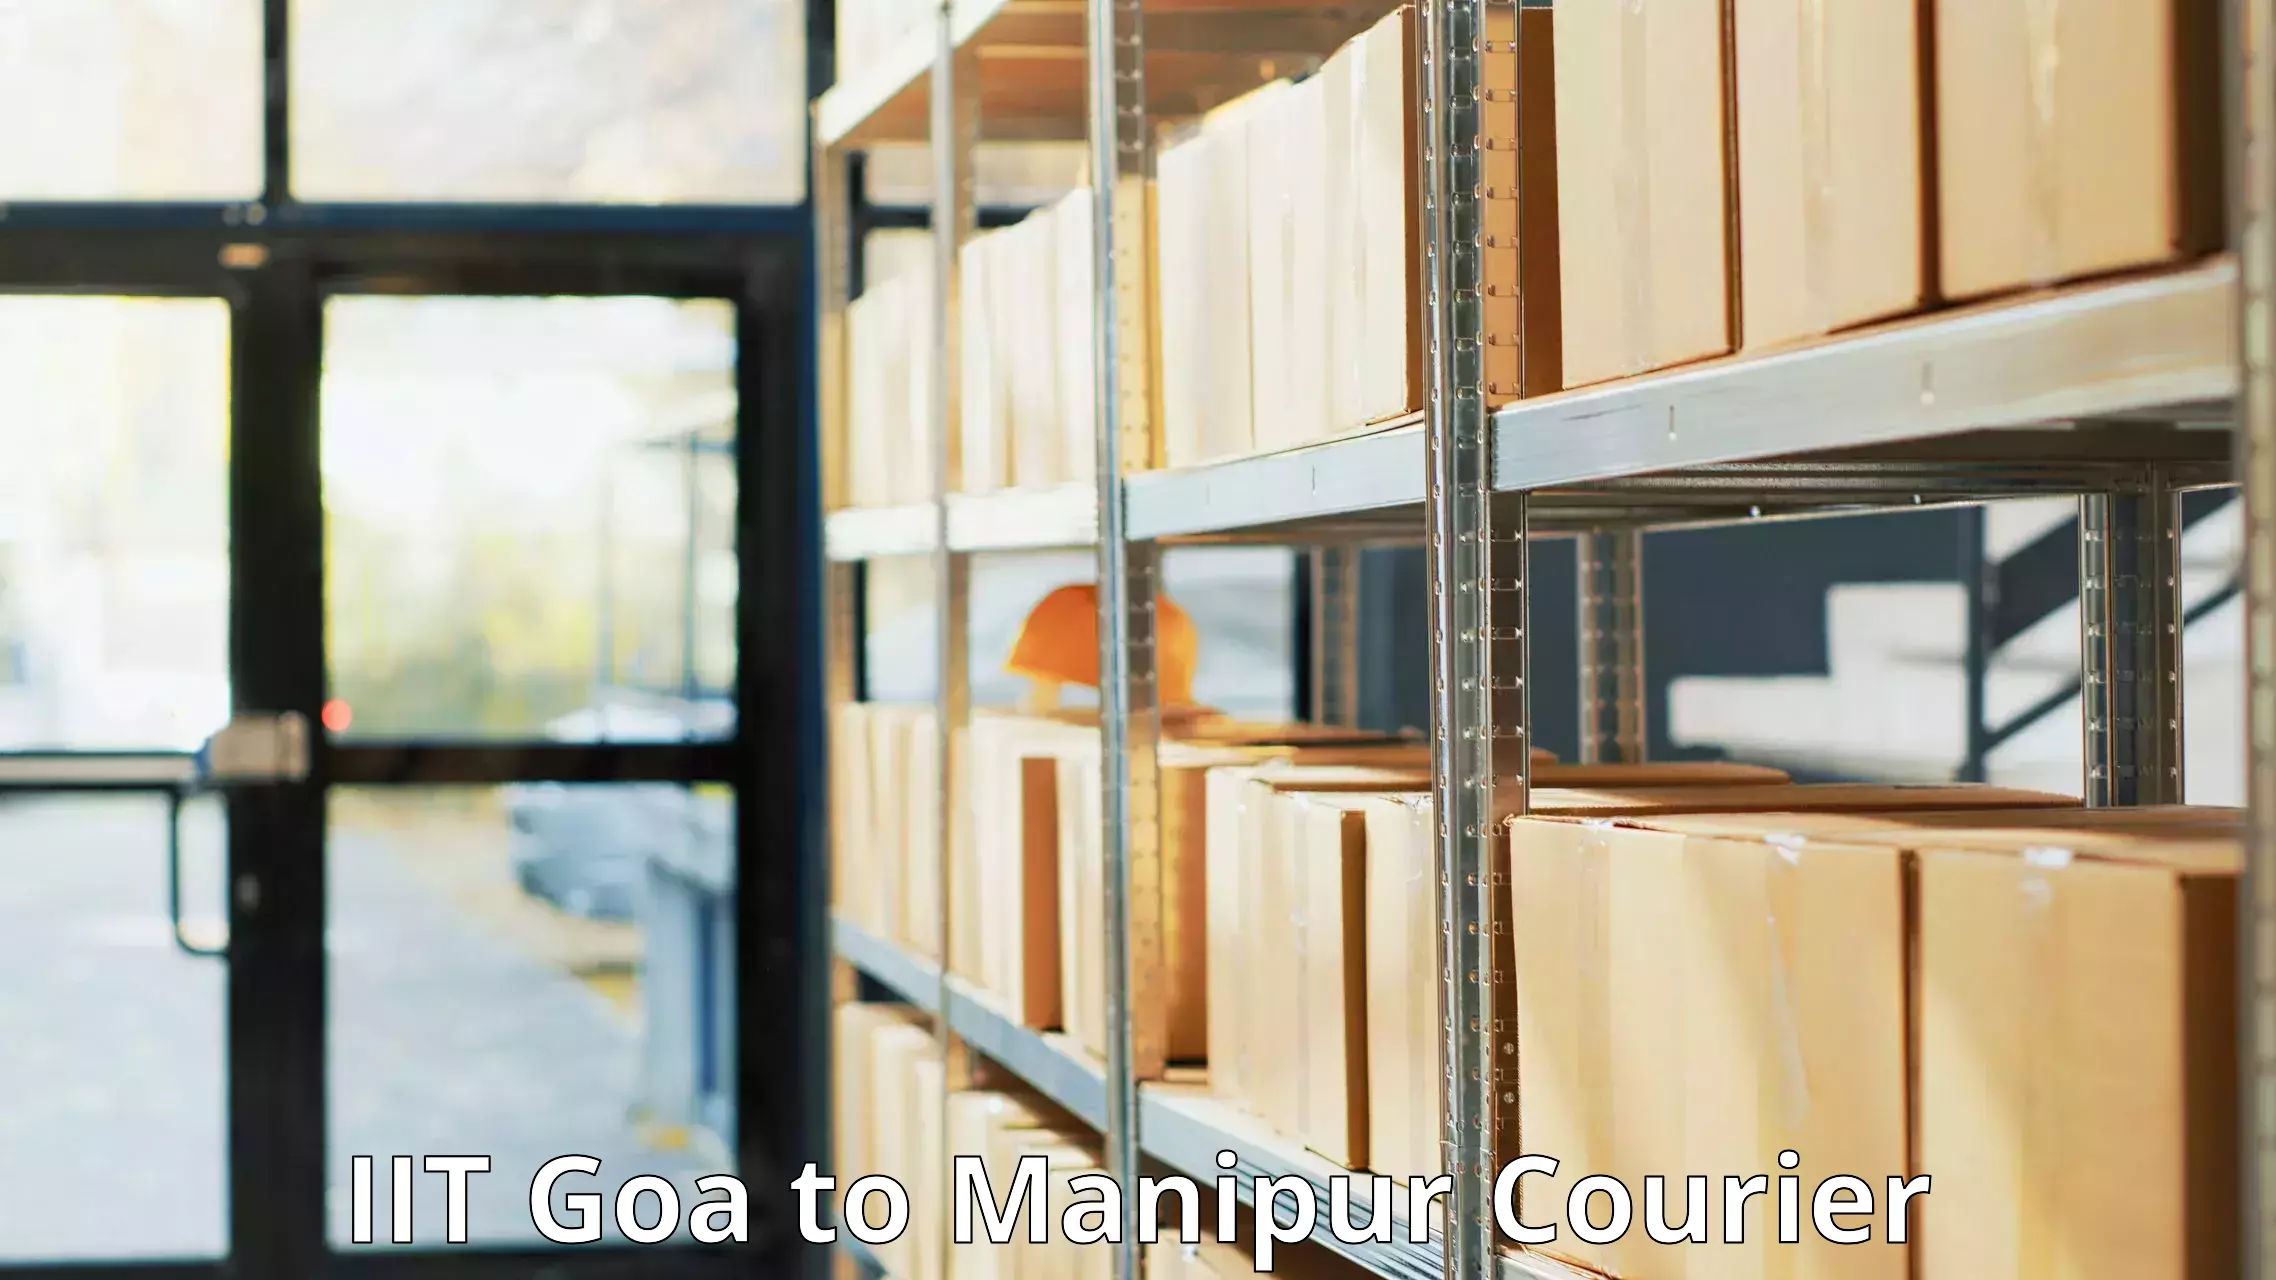 Fast delivery service IIT Goa to Manipur